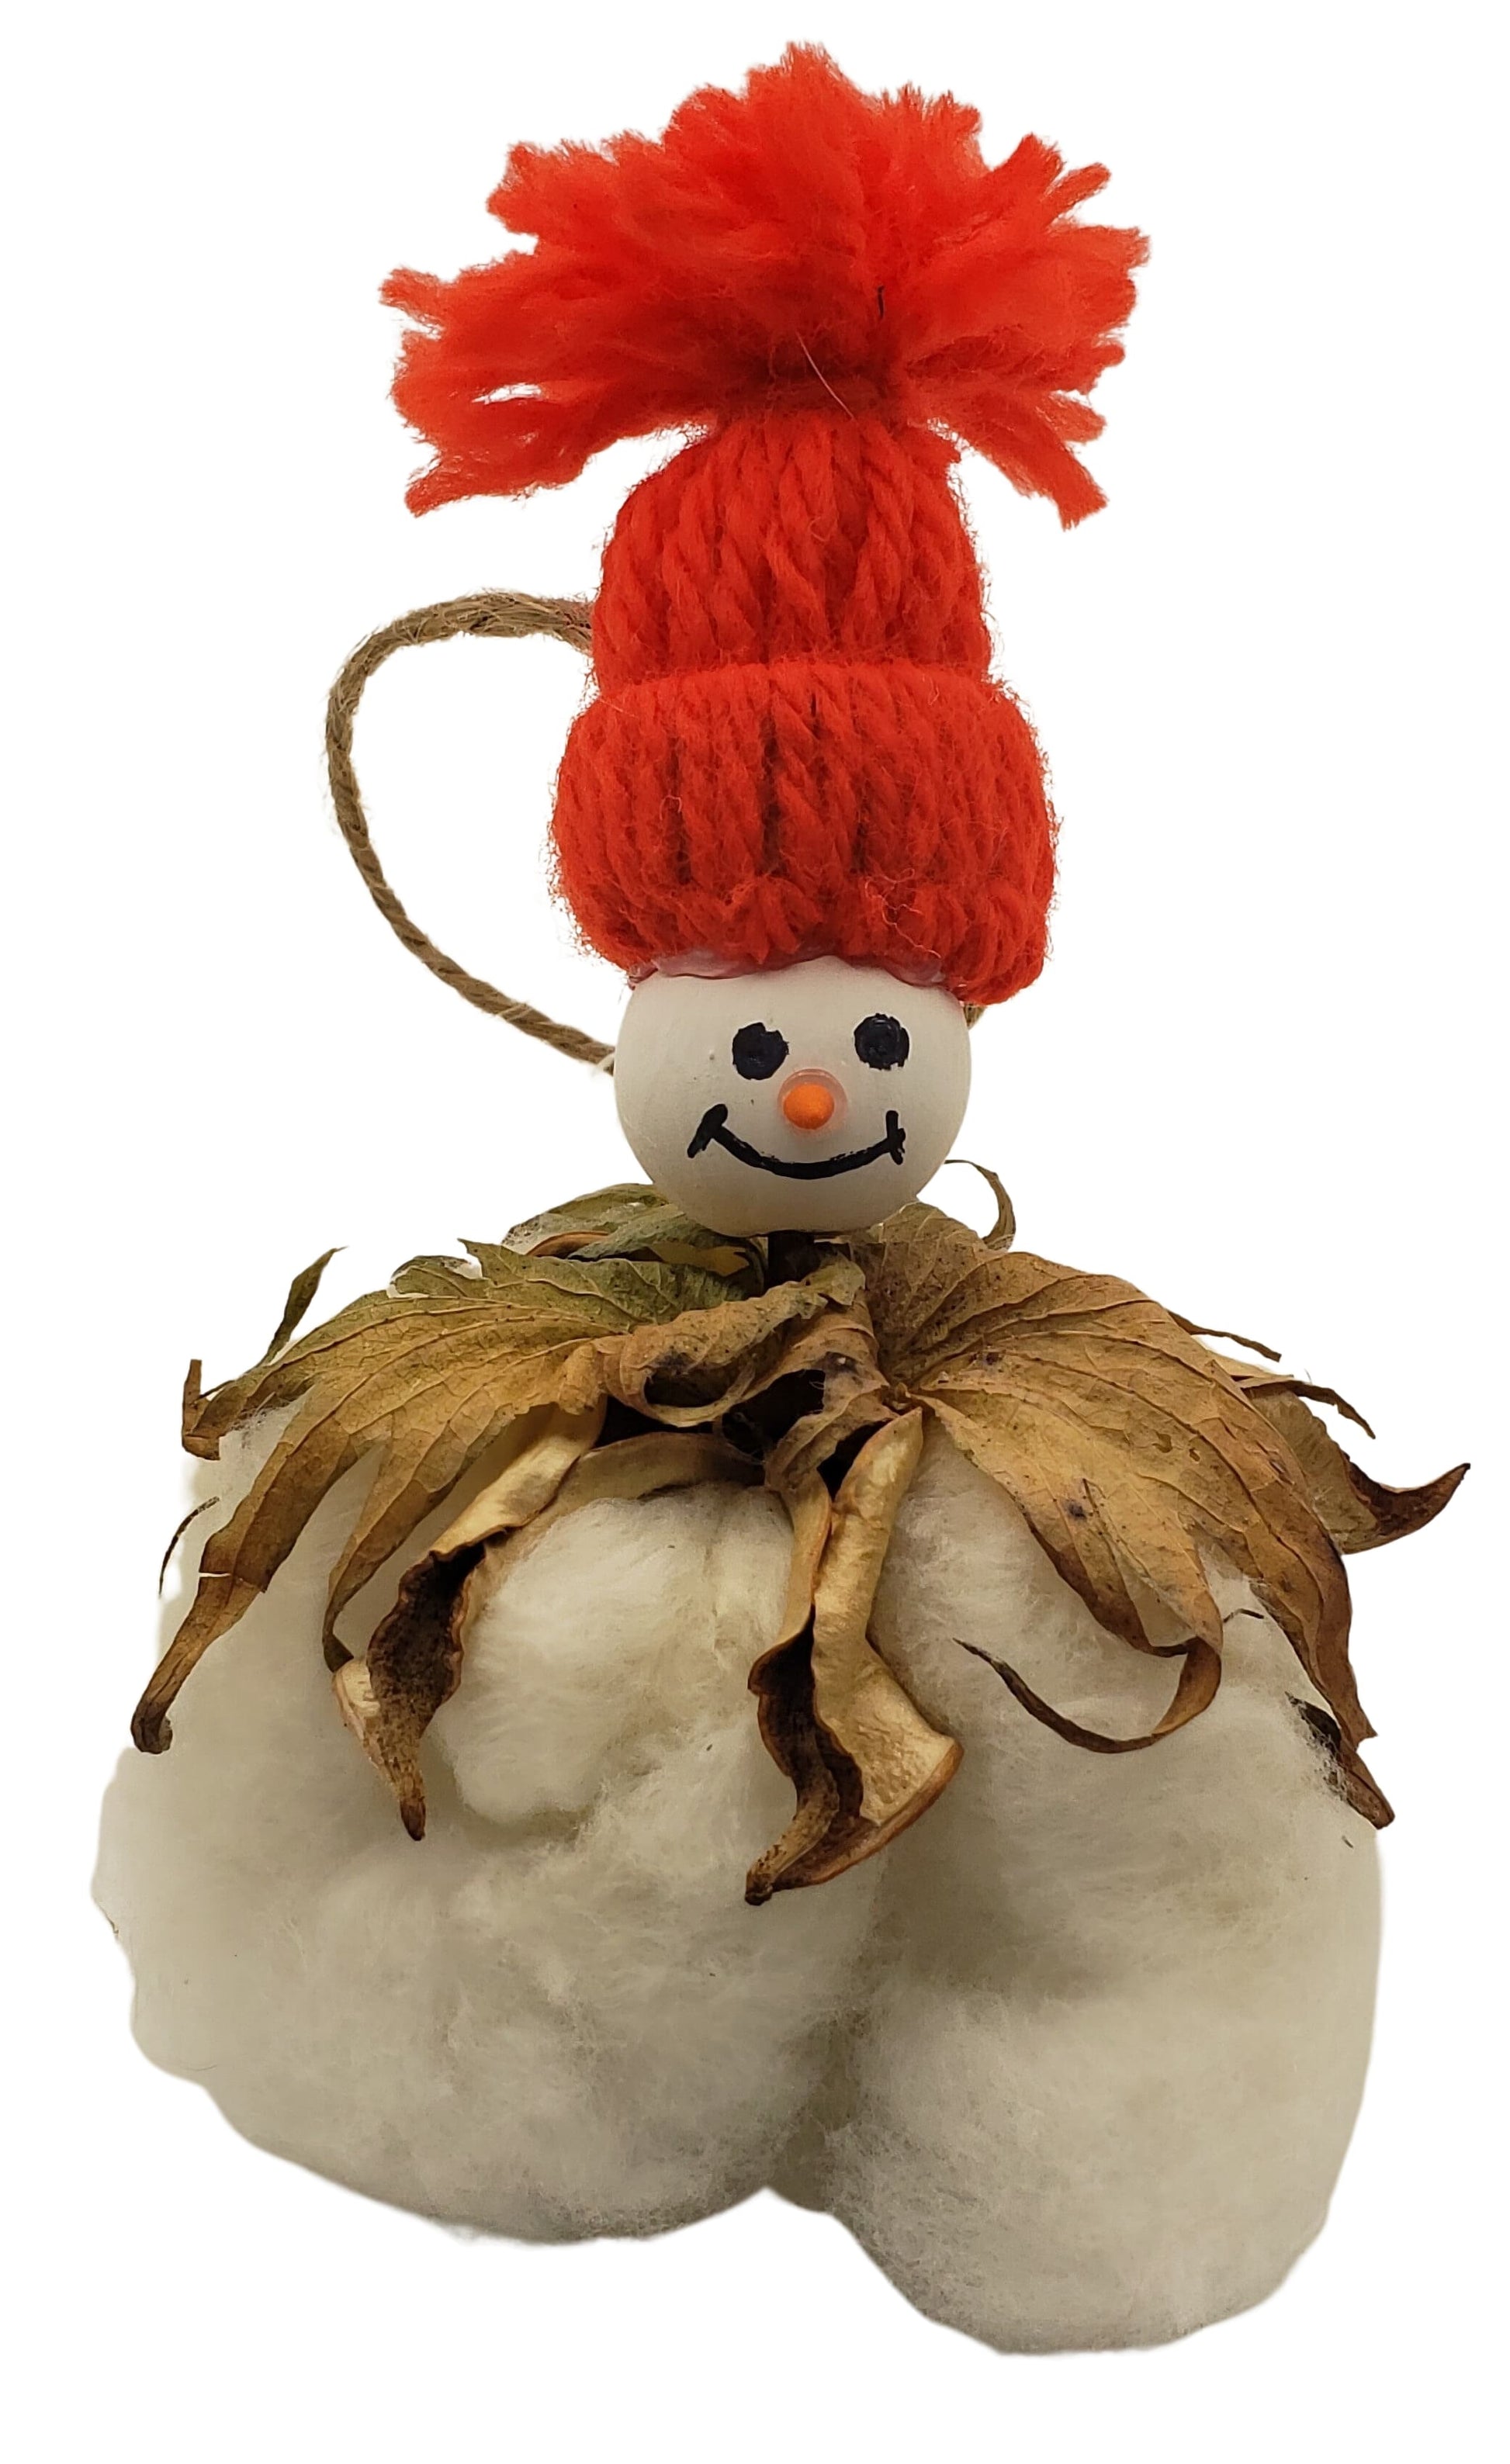 Natures Christmas - cotton boll snowman Christmas tree ornament with red toboggan hat